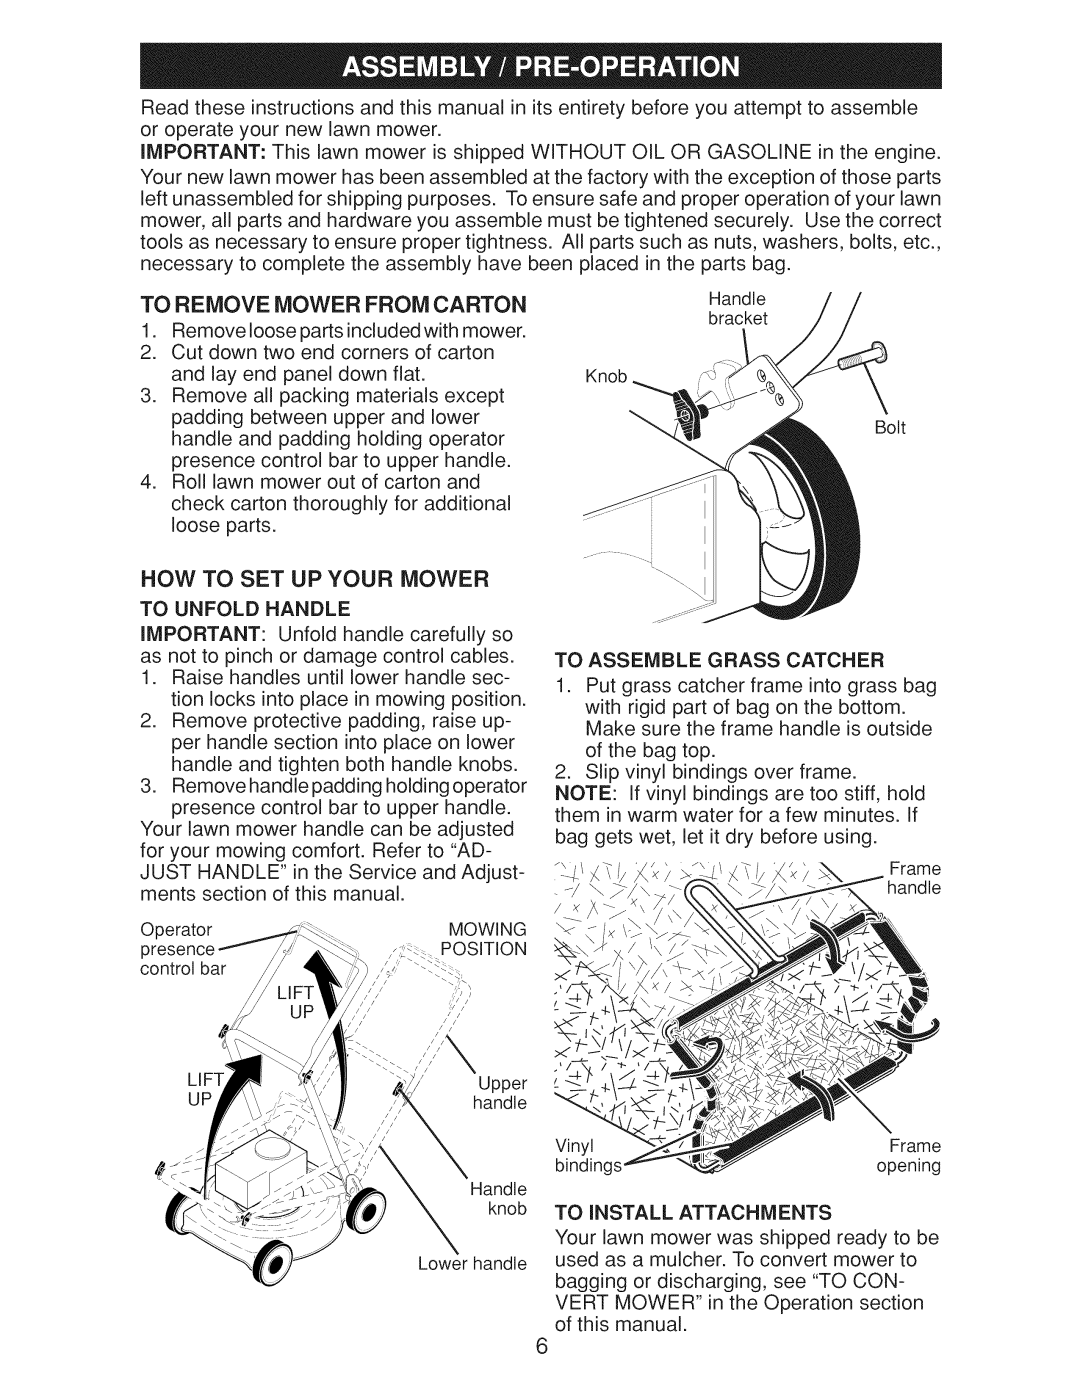 Craftsman Gcv160 manual To Remove Mower From Carton, How To Set Up Your Mower, To Install Attachments 